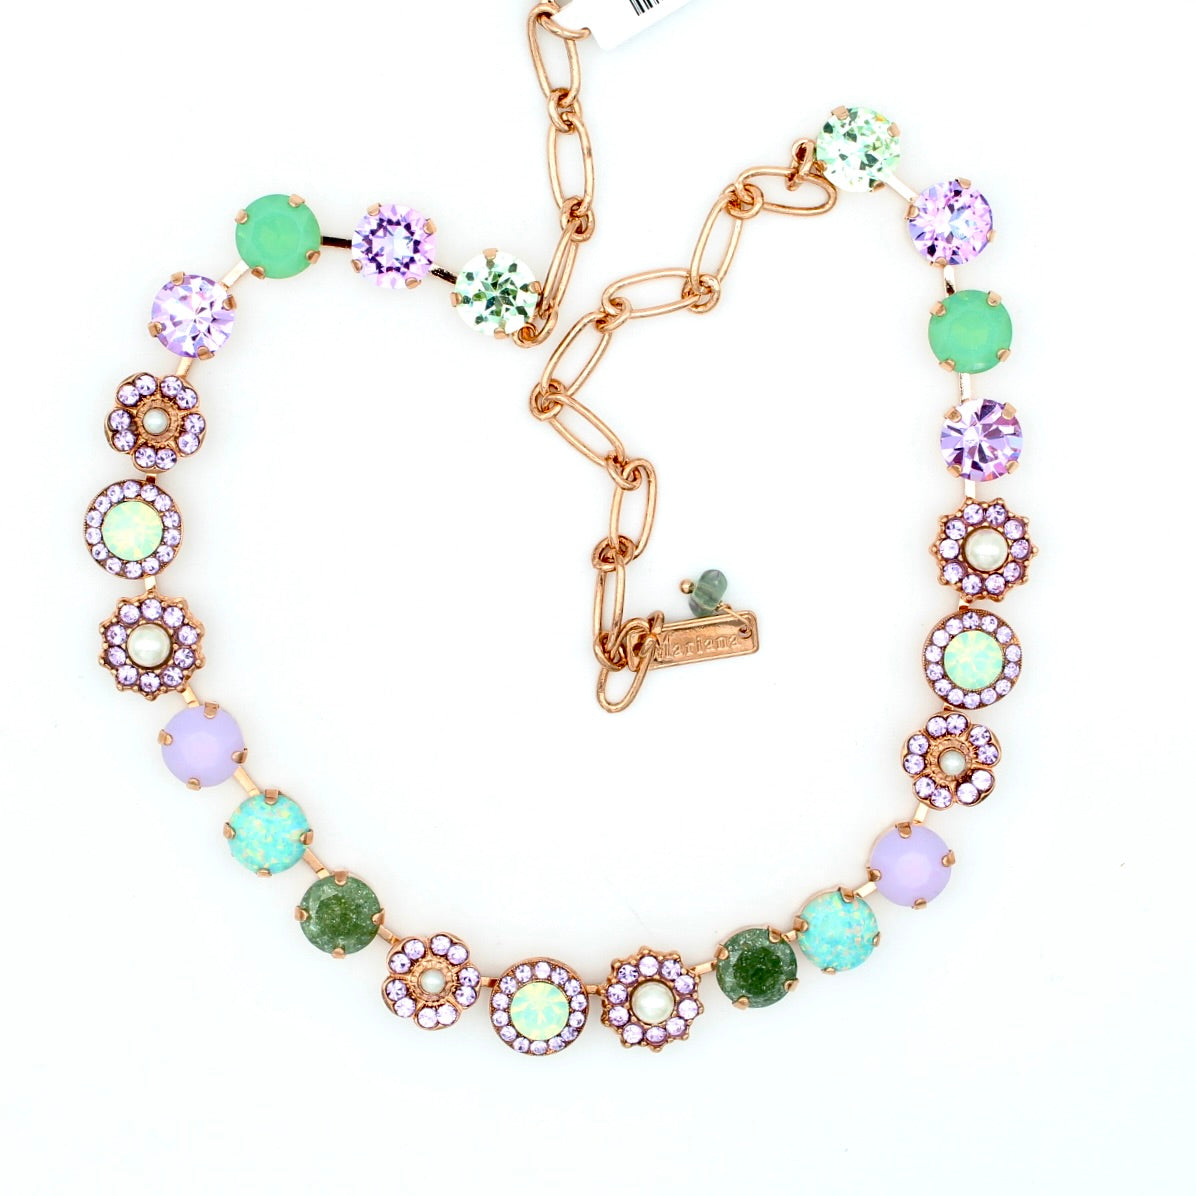 Lovable Mixed Element Mint Chip Necklace in Rose Gold - MaryTyke's